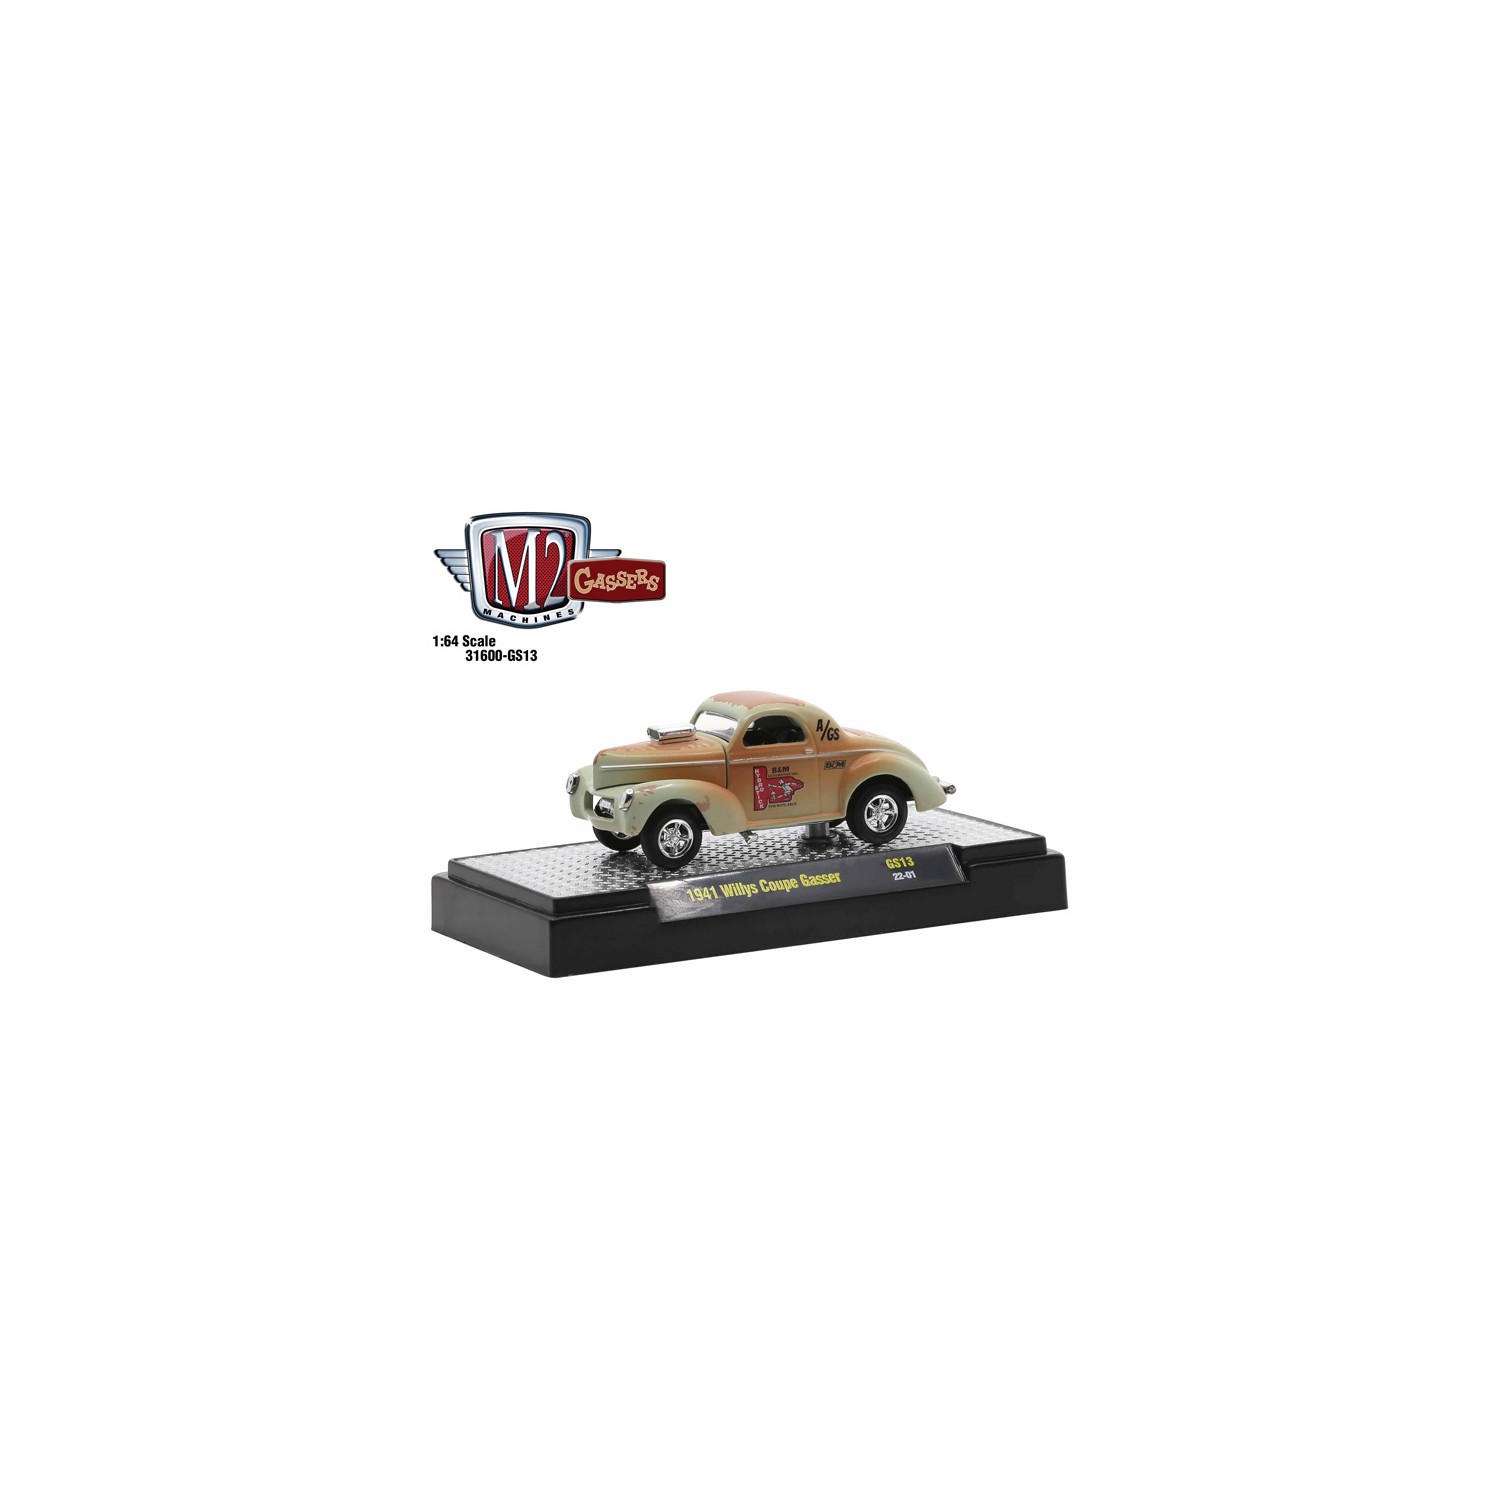 M2 Machines Hobby Exclusive - 1941 Willys Coupe Gasser